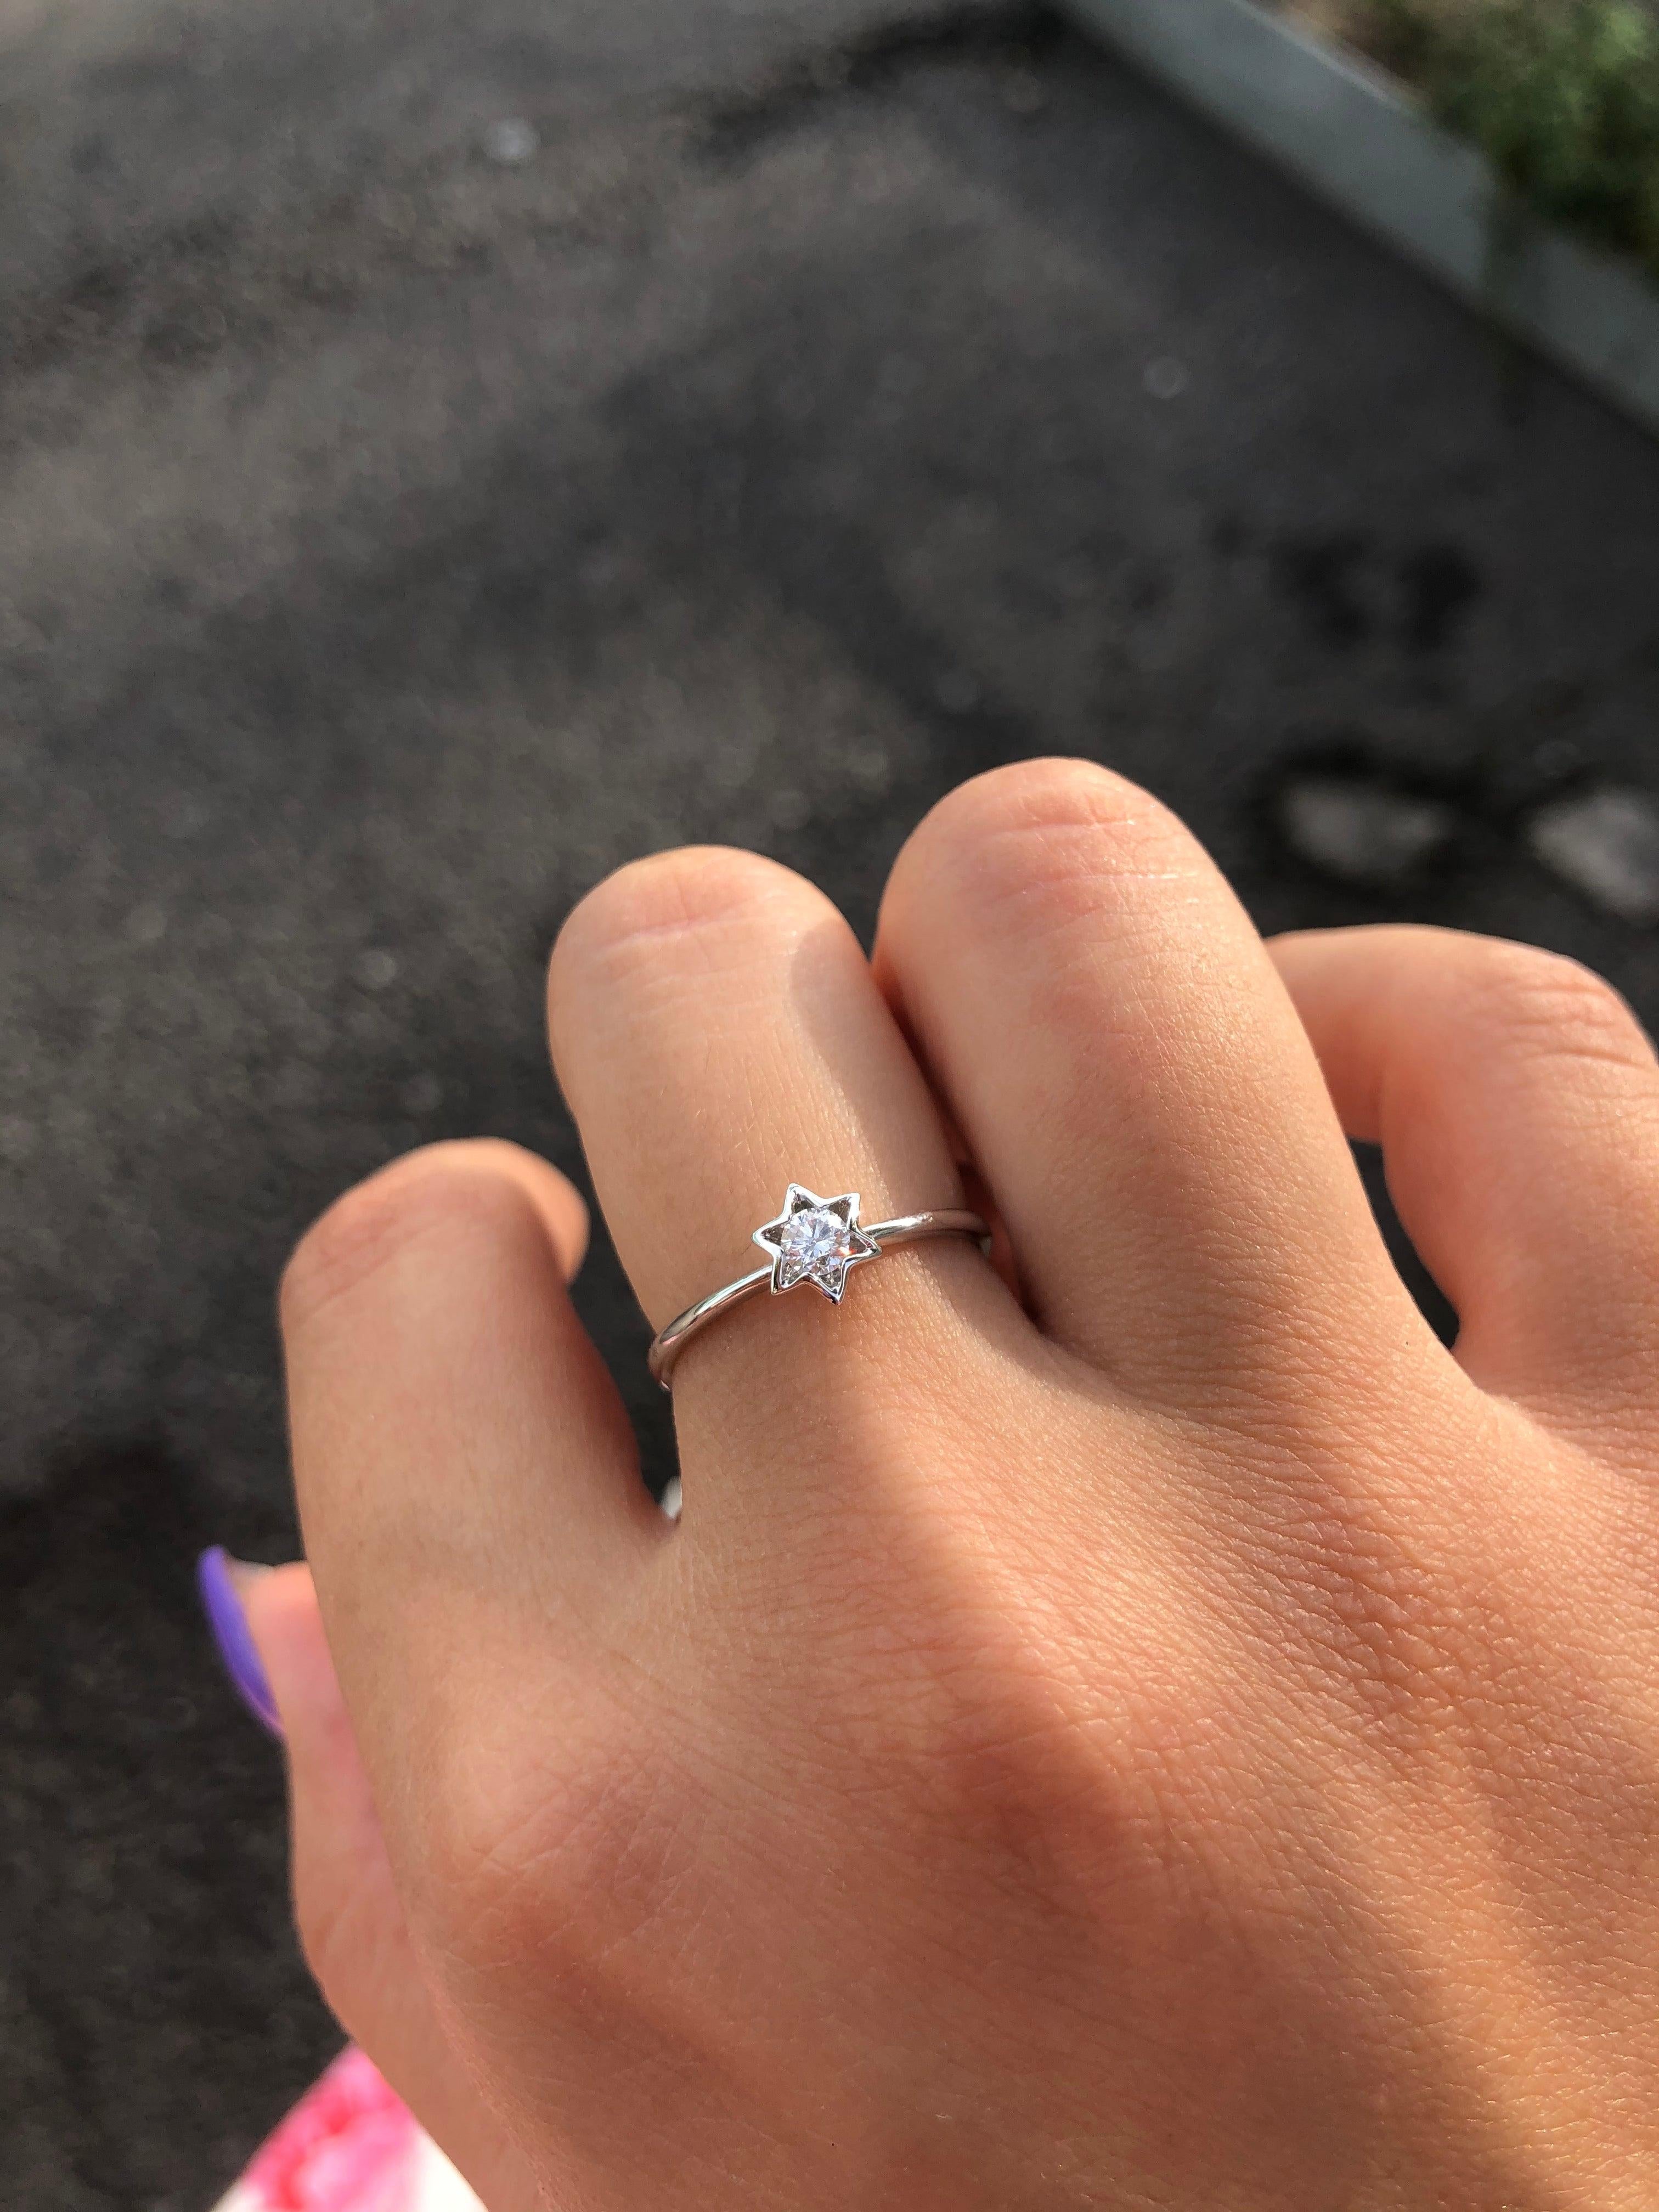 For Sale:  Delicate White Gold White Diamond Engagement Wedding Ring 4